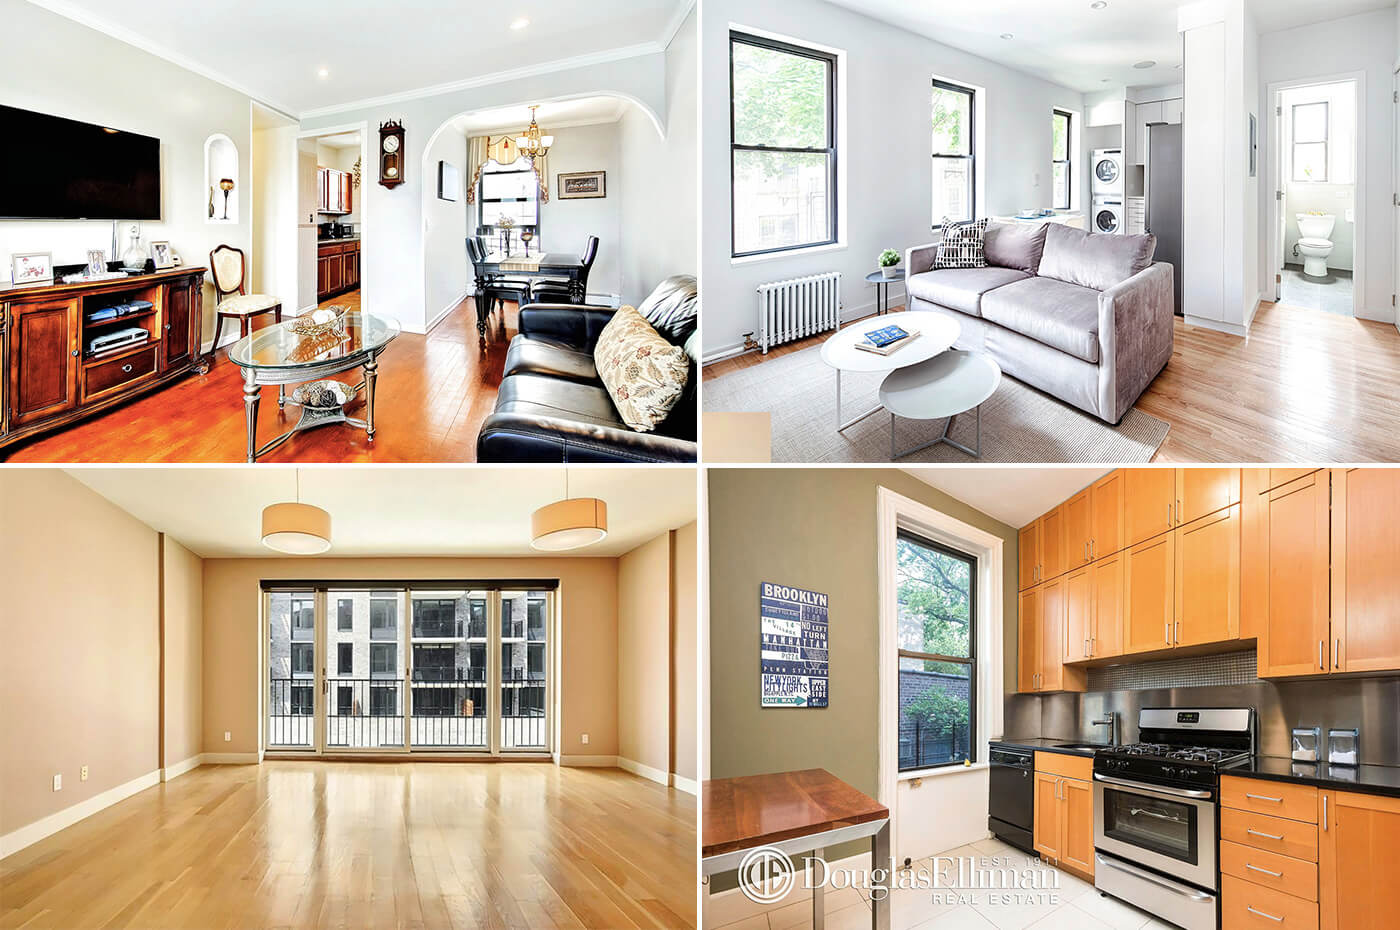 Brooklyn Homes for Sale East Williamsburg Park Slope Prospect Heights Boeurm Hill